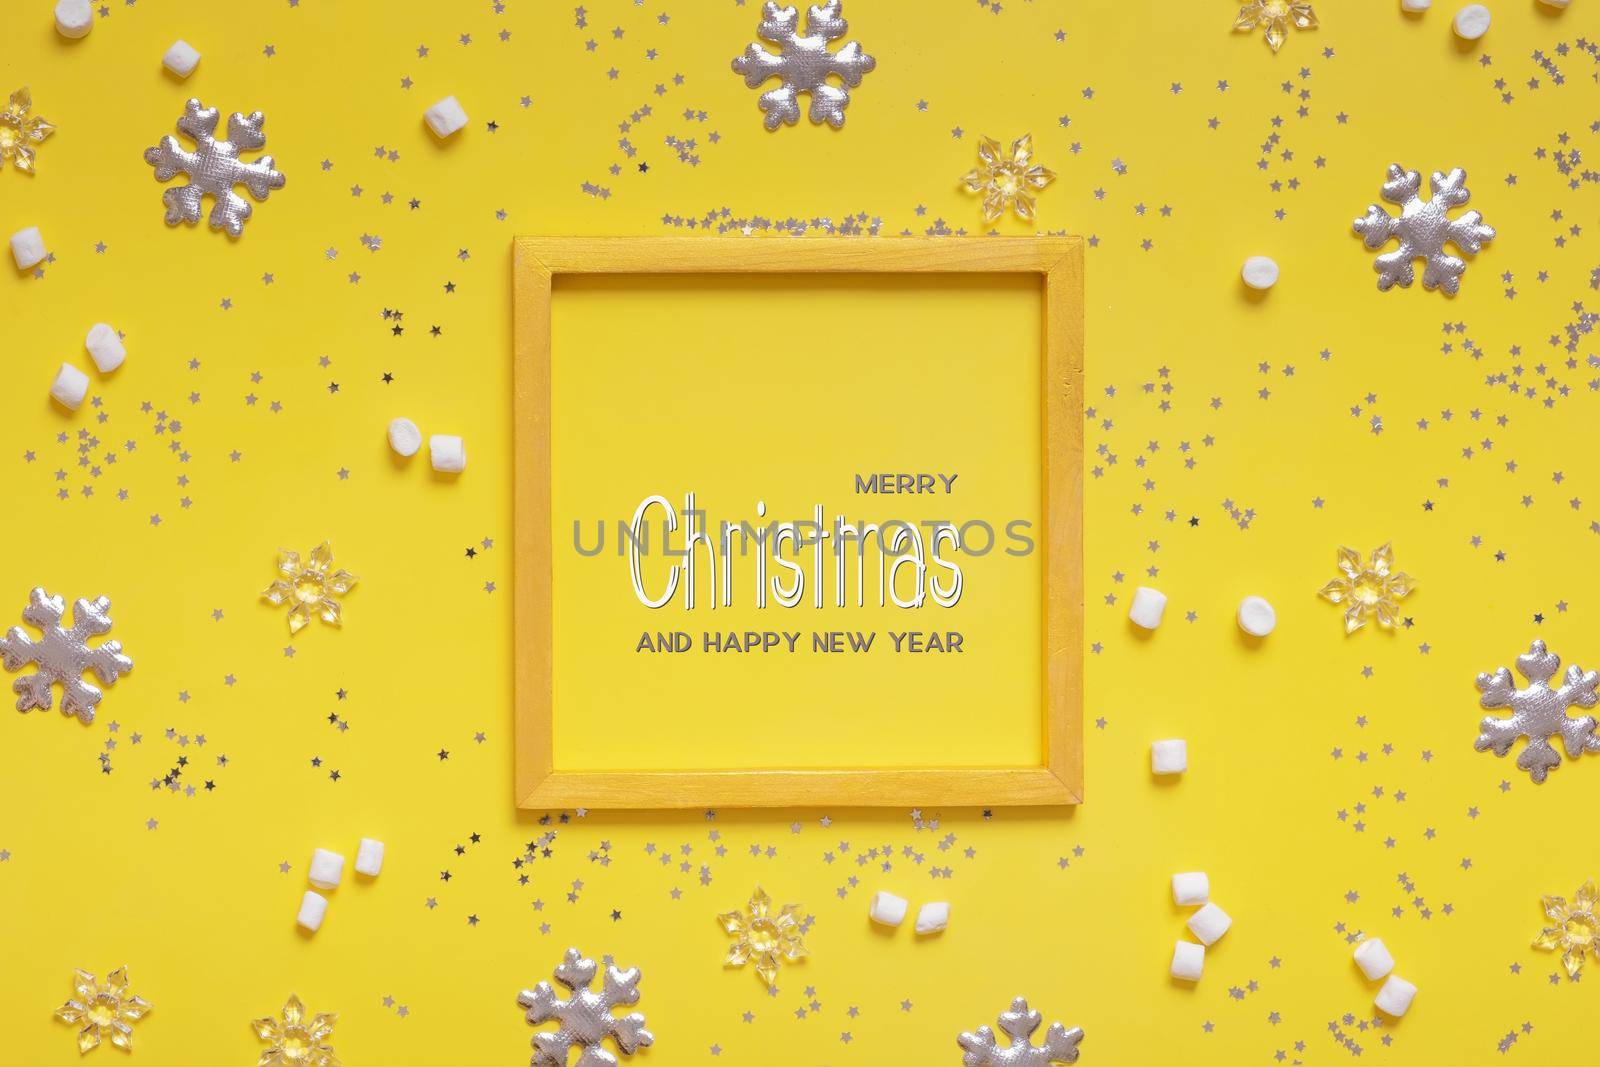 Merry Christmas greeting text in wooden frame with winter decoration on colored background. High quality photo